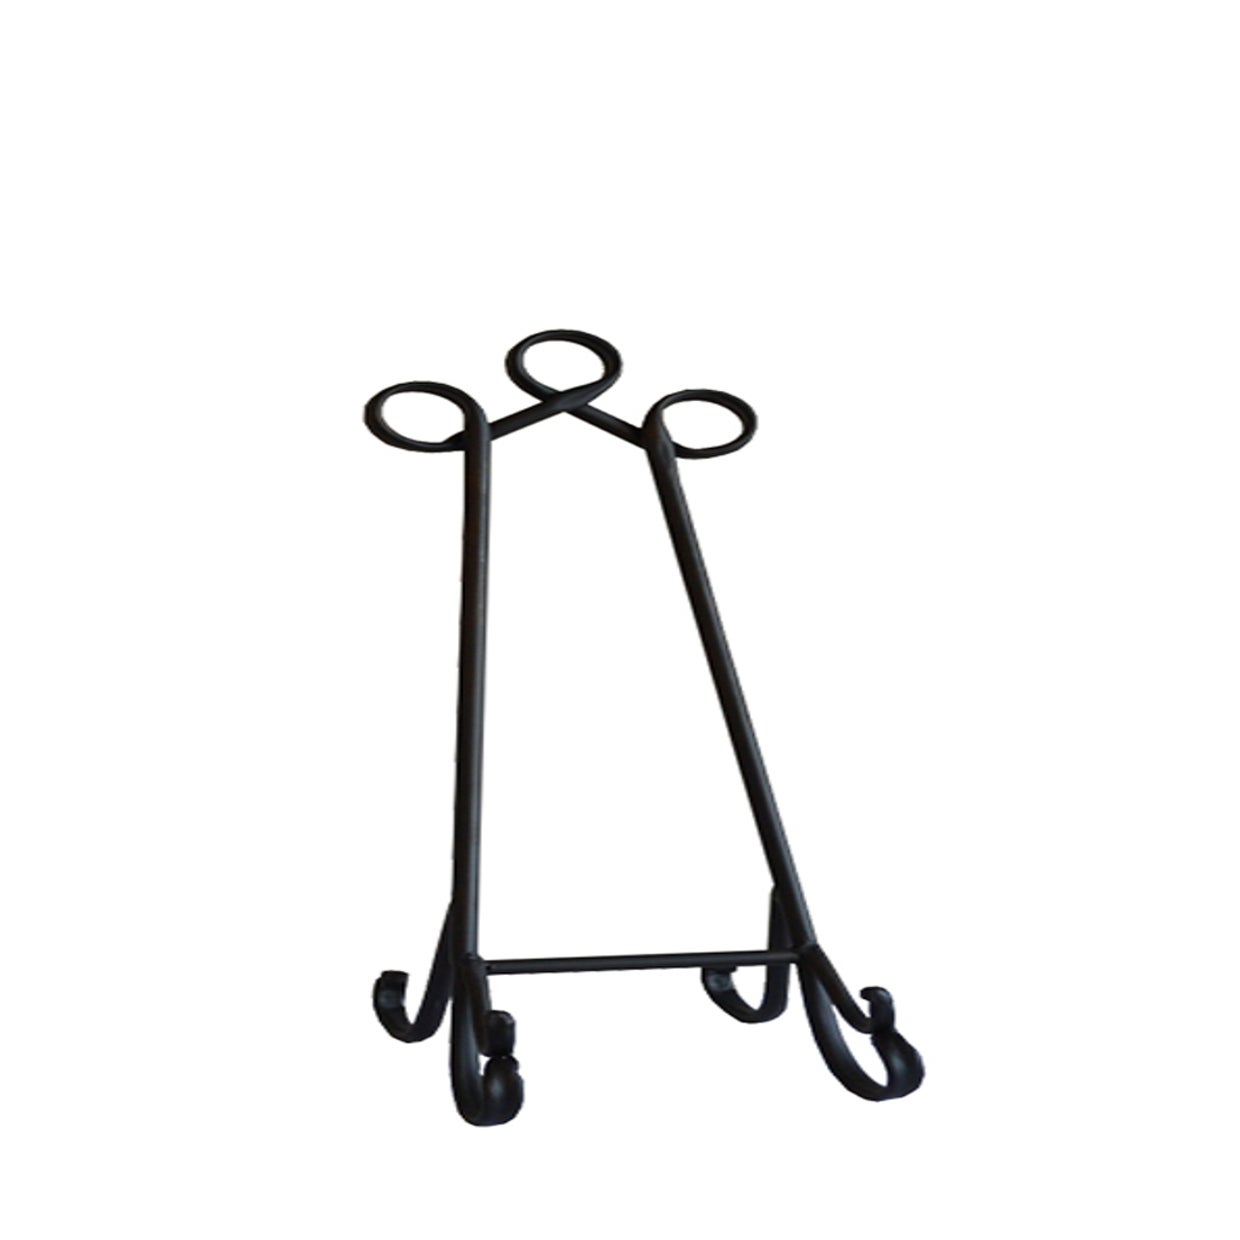 IRON BOOK STAND - SMALL